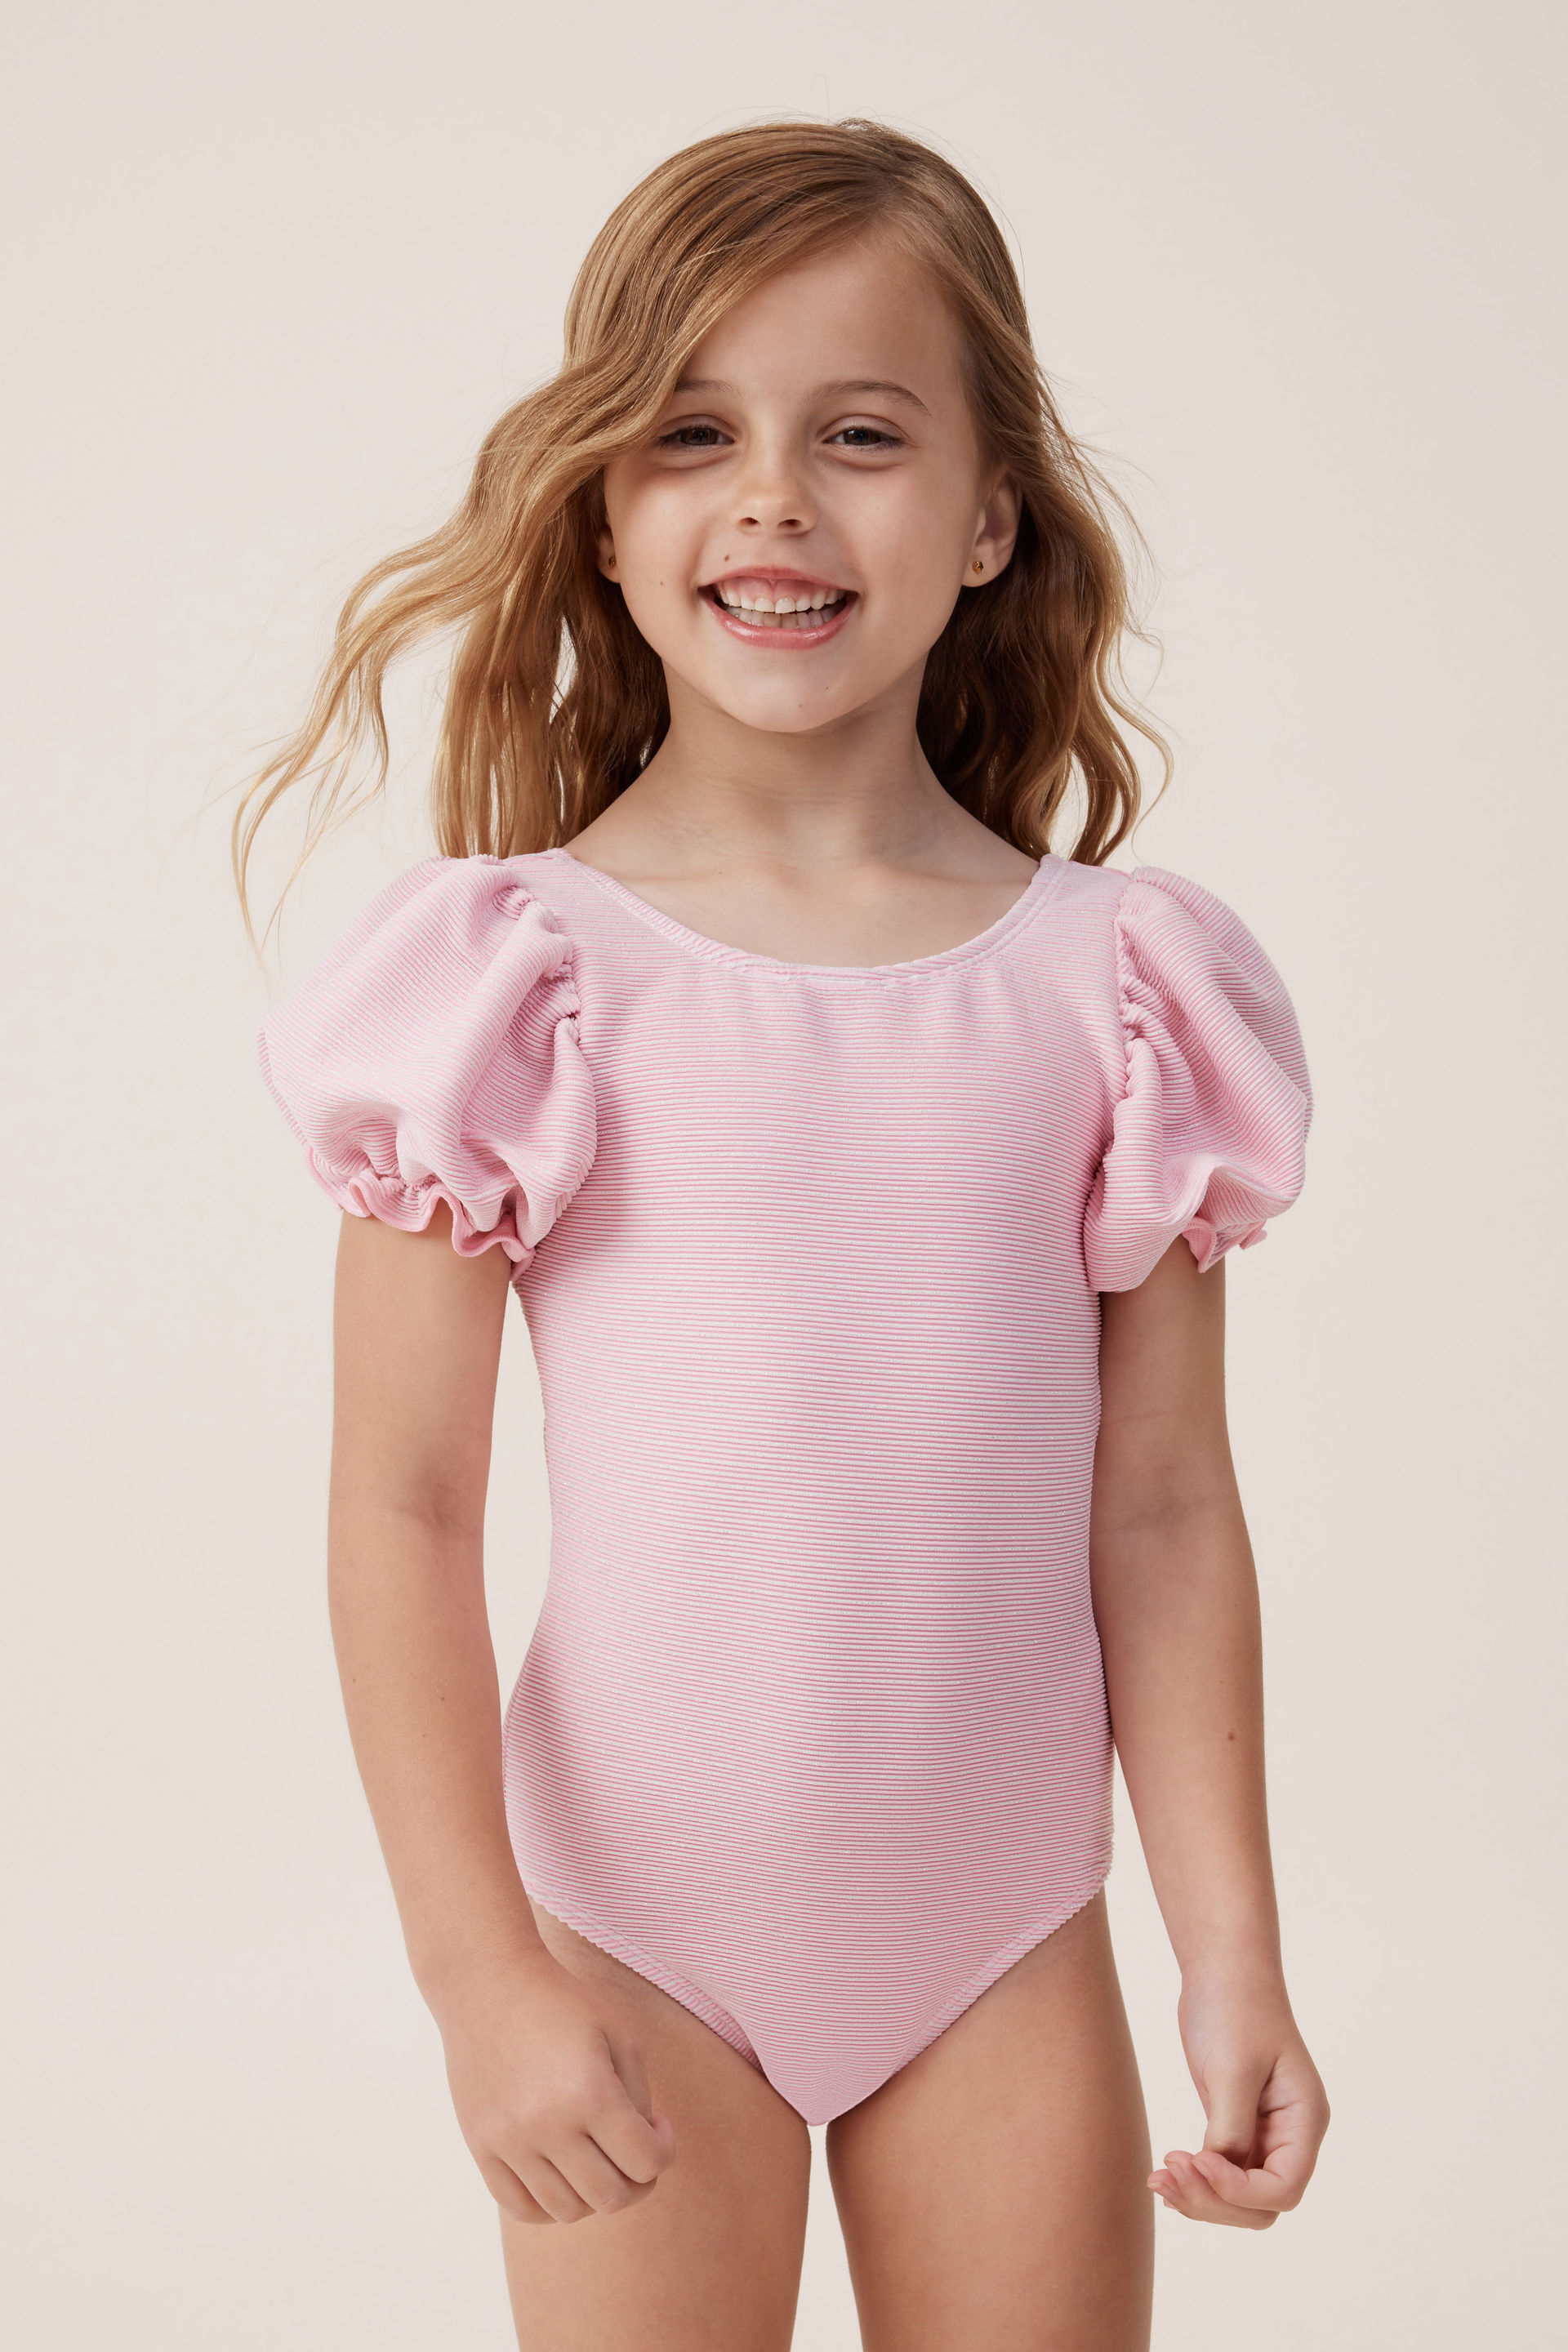 Cotton On Kids - Puff Sleeve One Piece - Cali Pink/Sparkle